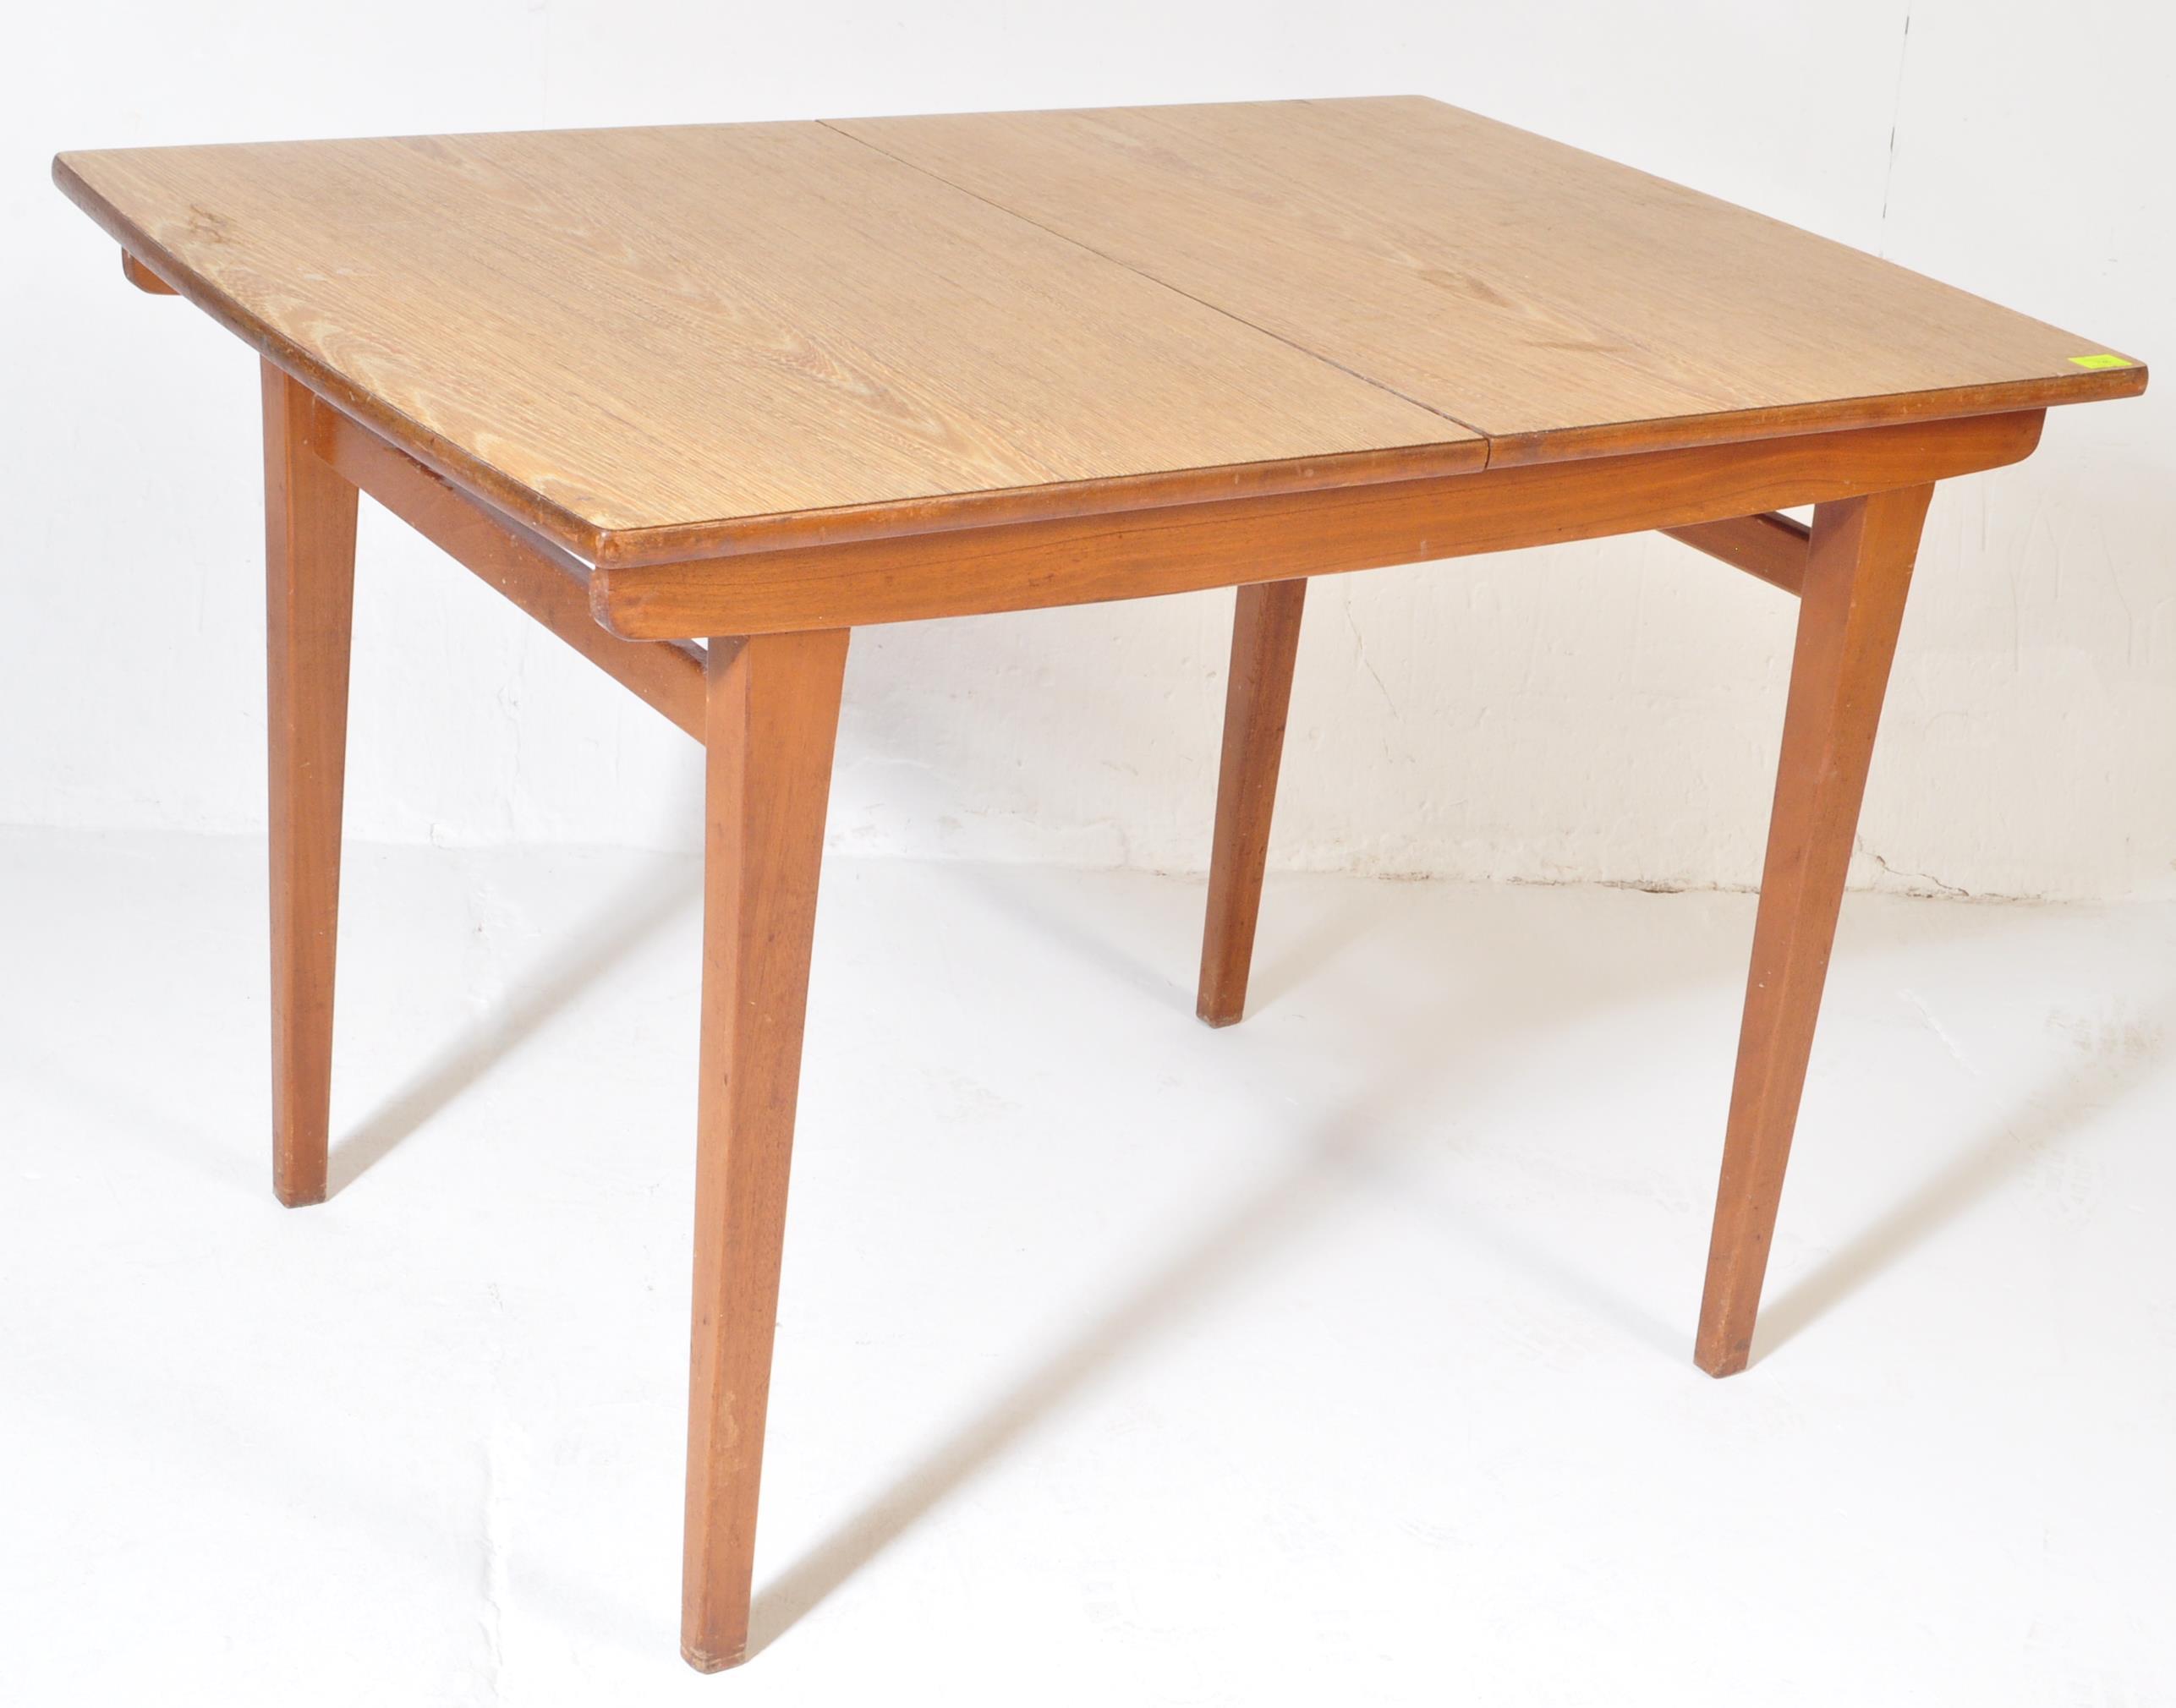 NATHAN FURNITURE - MID CENTURY 1960S DINING TABLE - Image 2 of 7